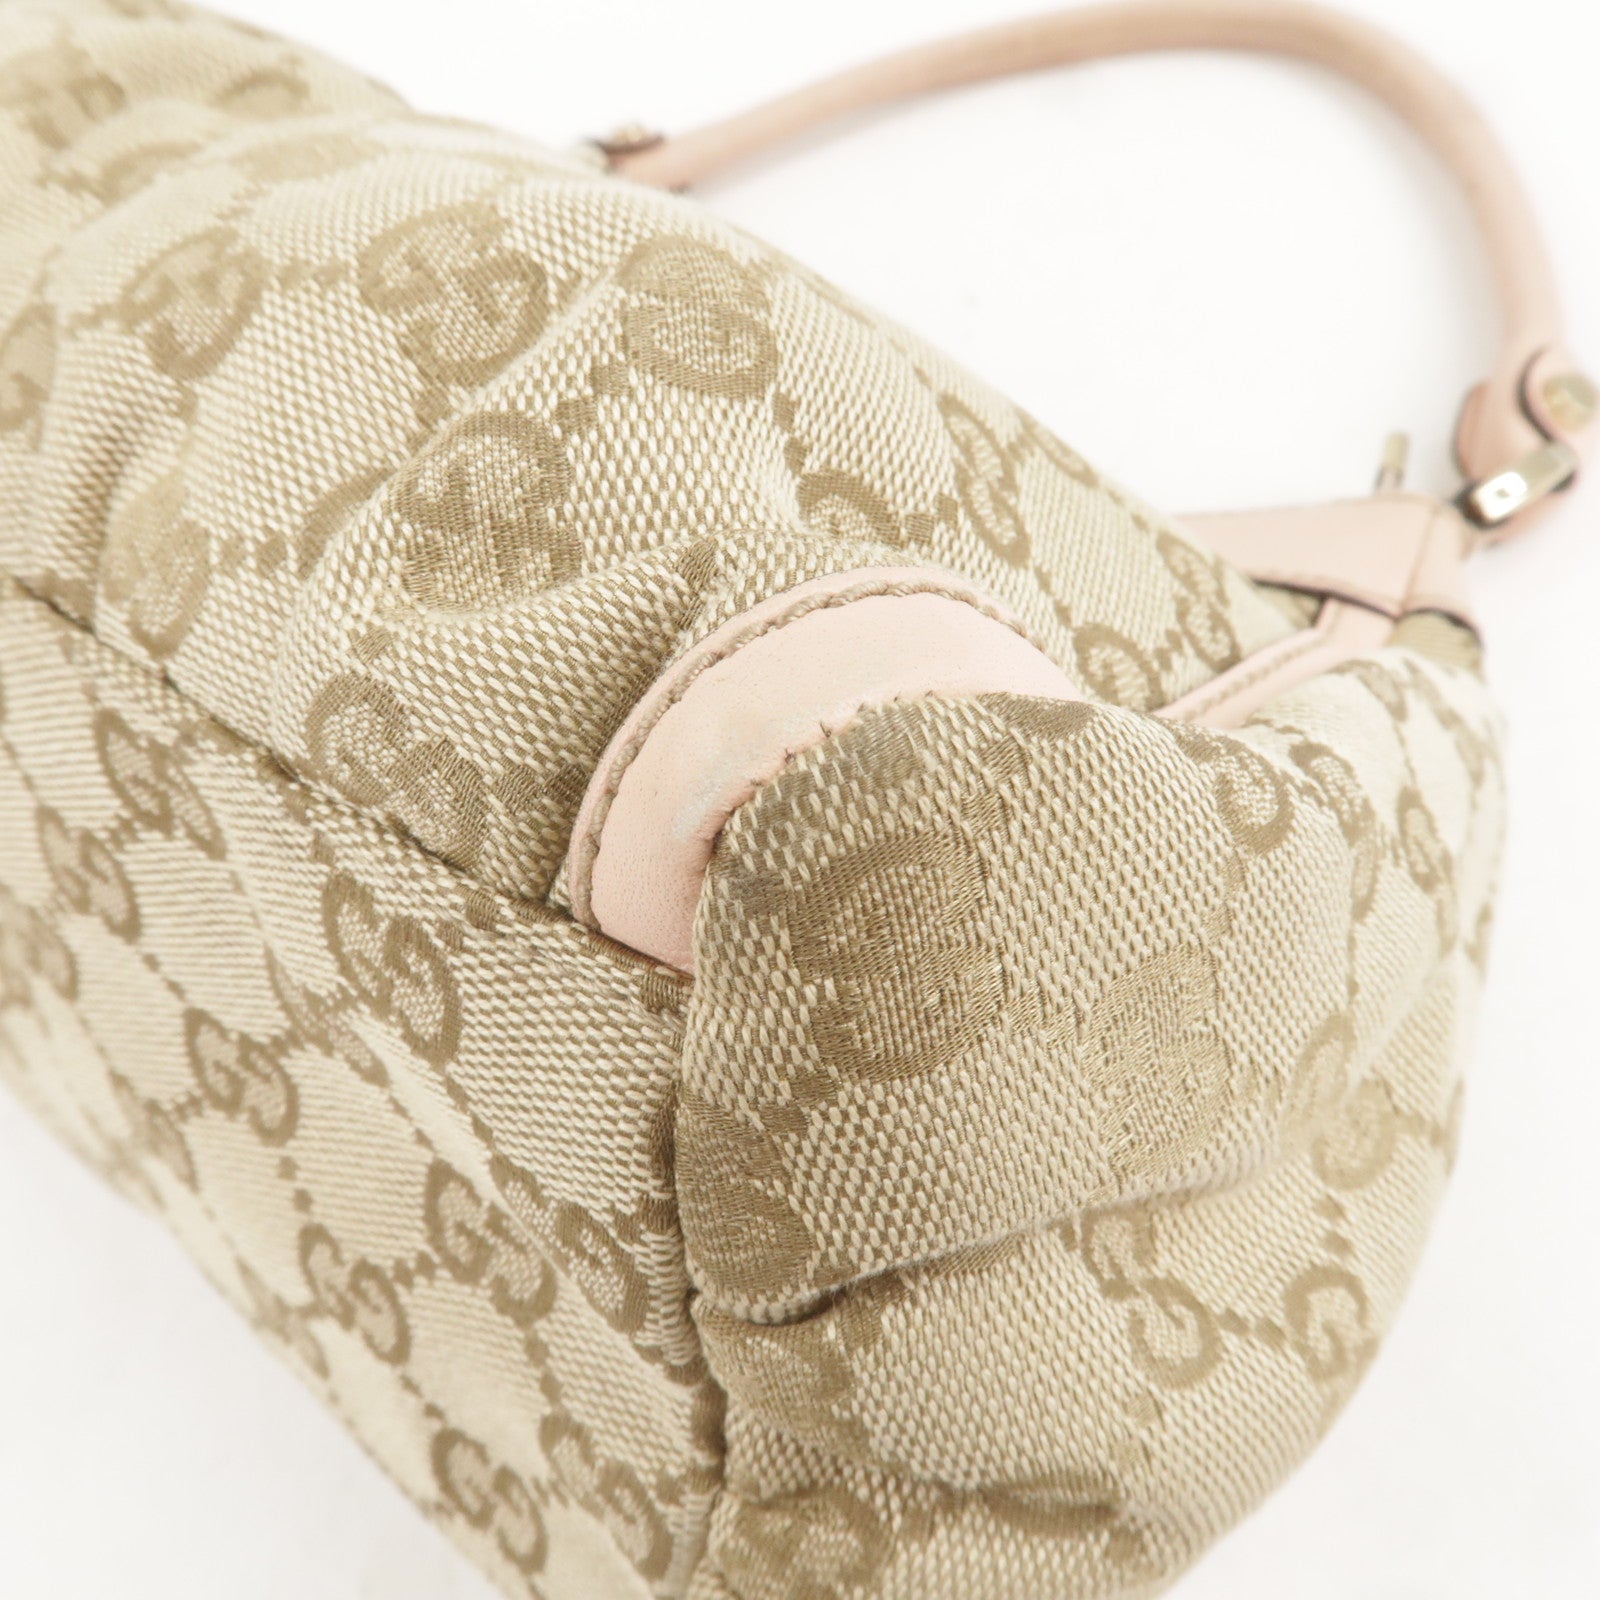 GUCCI-Abbey-GG-Canvas-Leather-Shoulder-Bag-Beige-Pink-190525 – dct